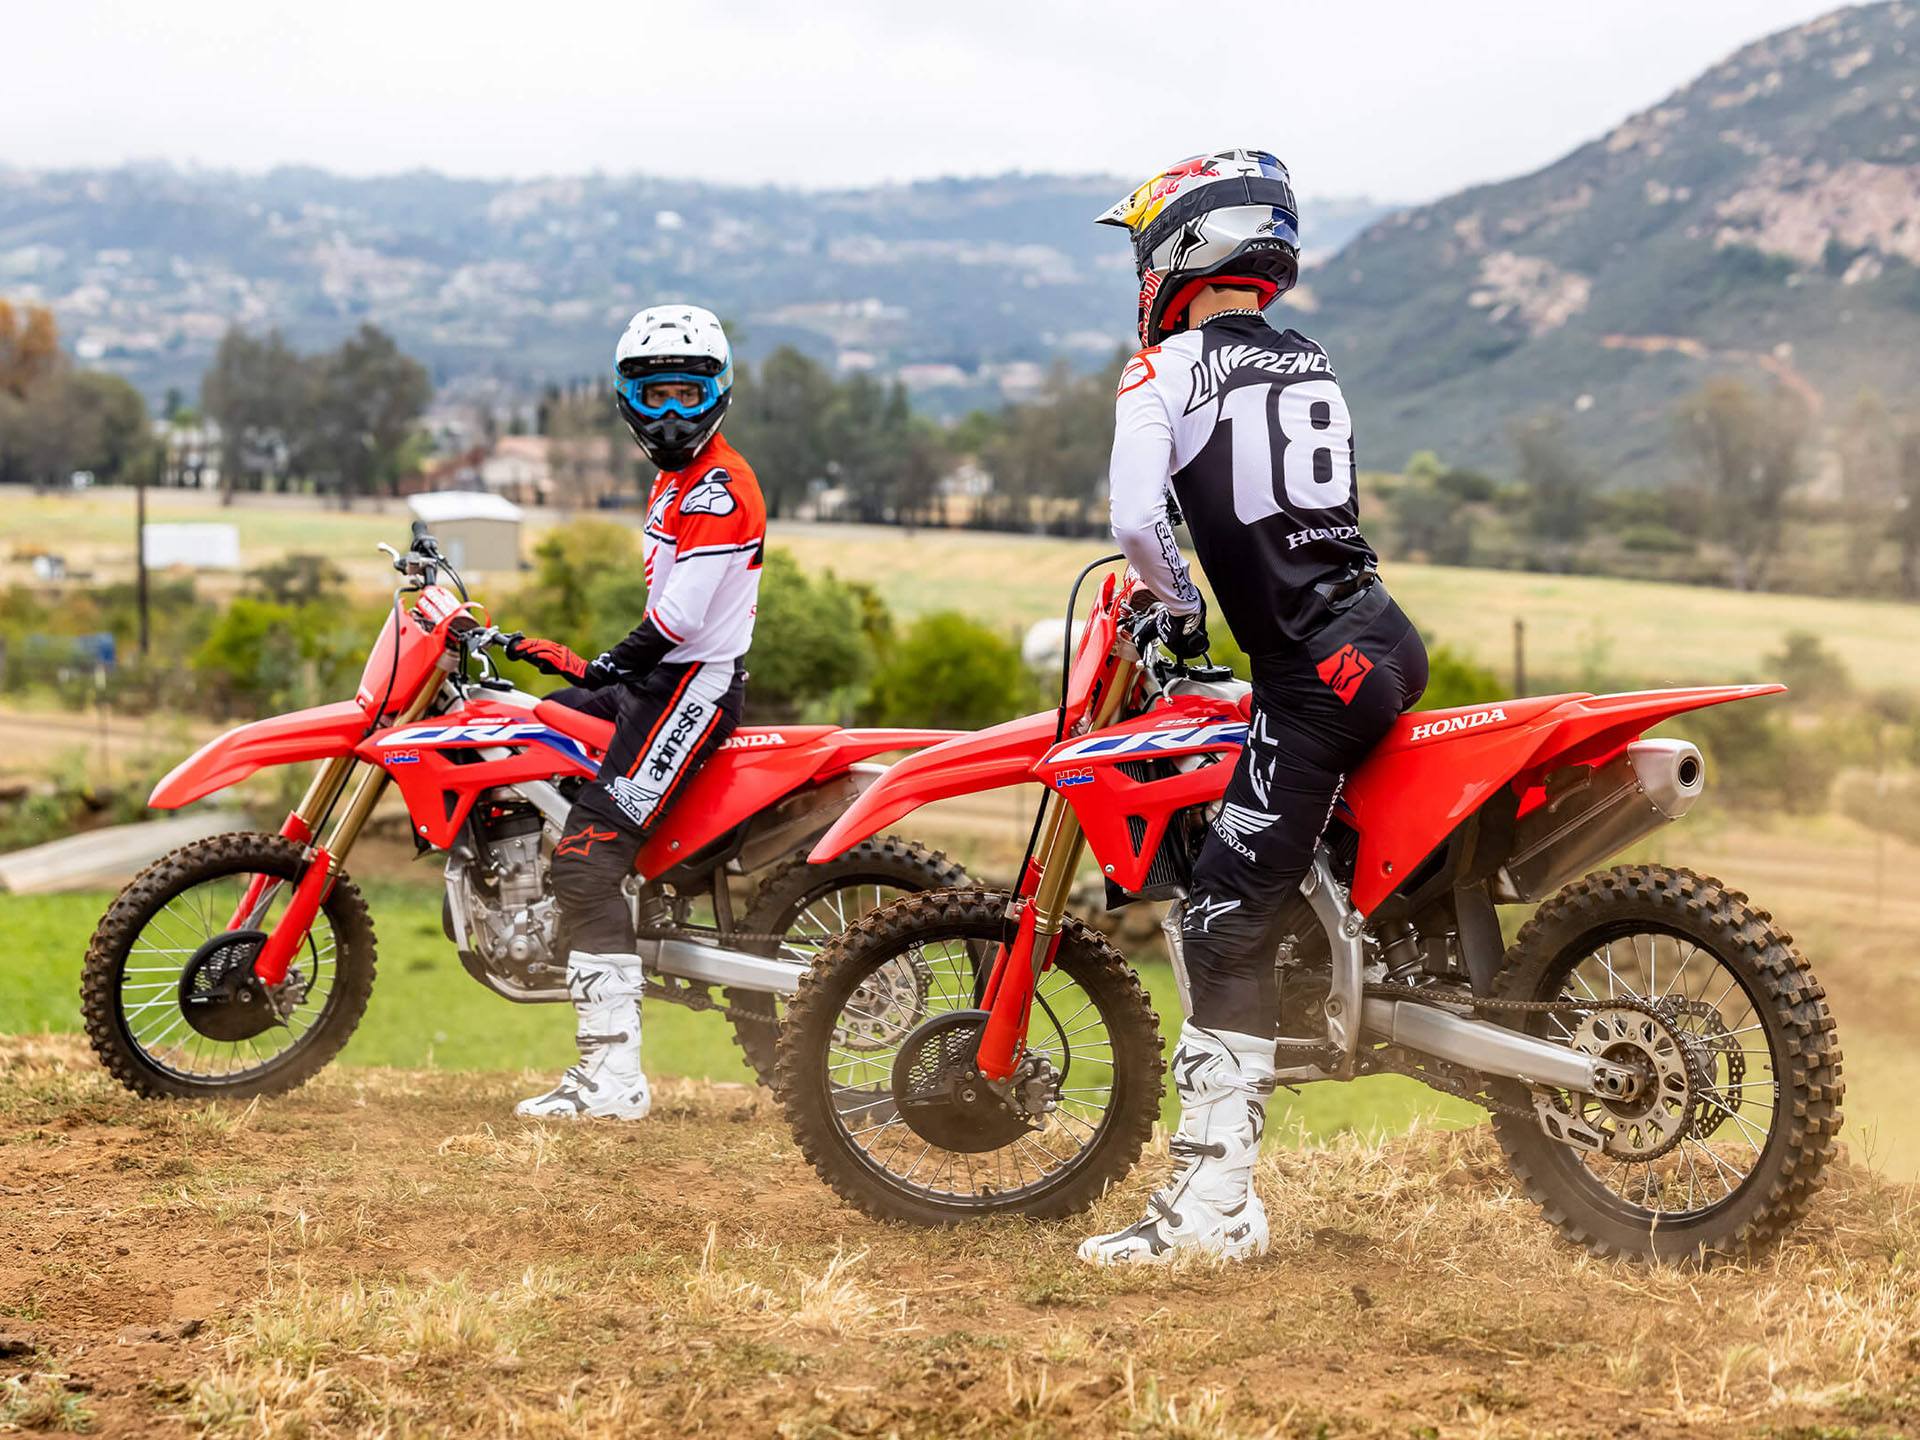 2023 Honda CRF250R in Brookhaven, Mississippi - Photo 2